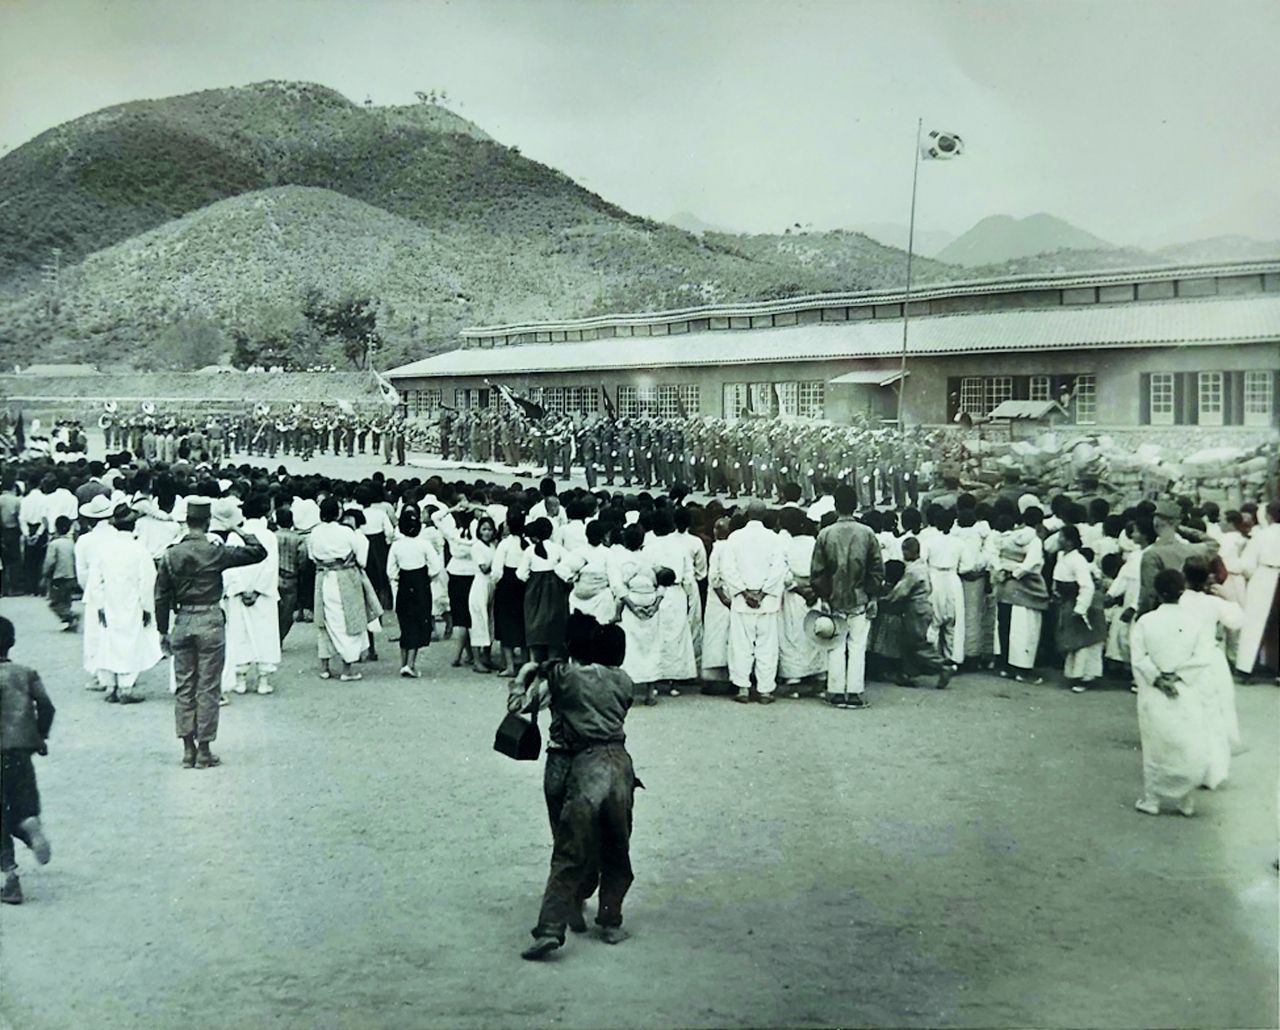 Koreans gather at a ceremony in Gapyeong, Gyeonggi Province, on May 29, 1954 where relief clothing from the US was distributed to Koreans in need. (Courtesy of Stephen Spina)